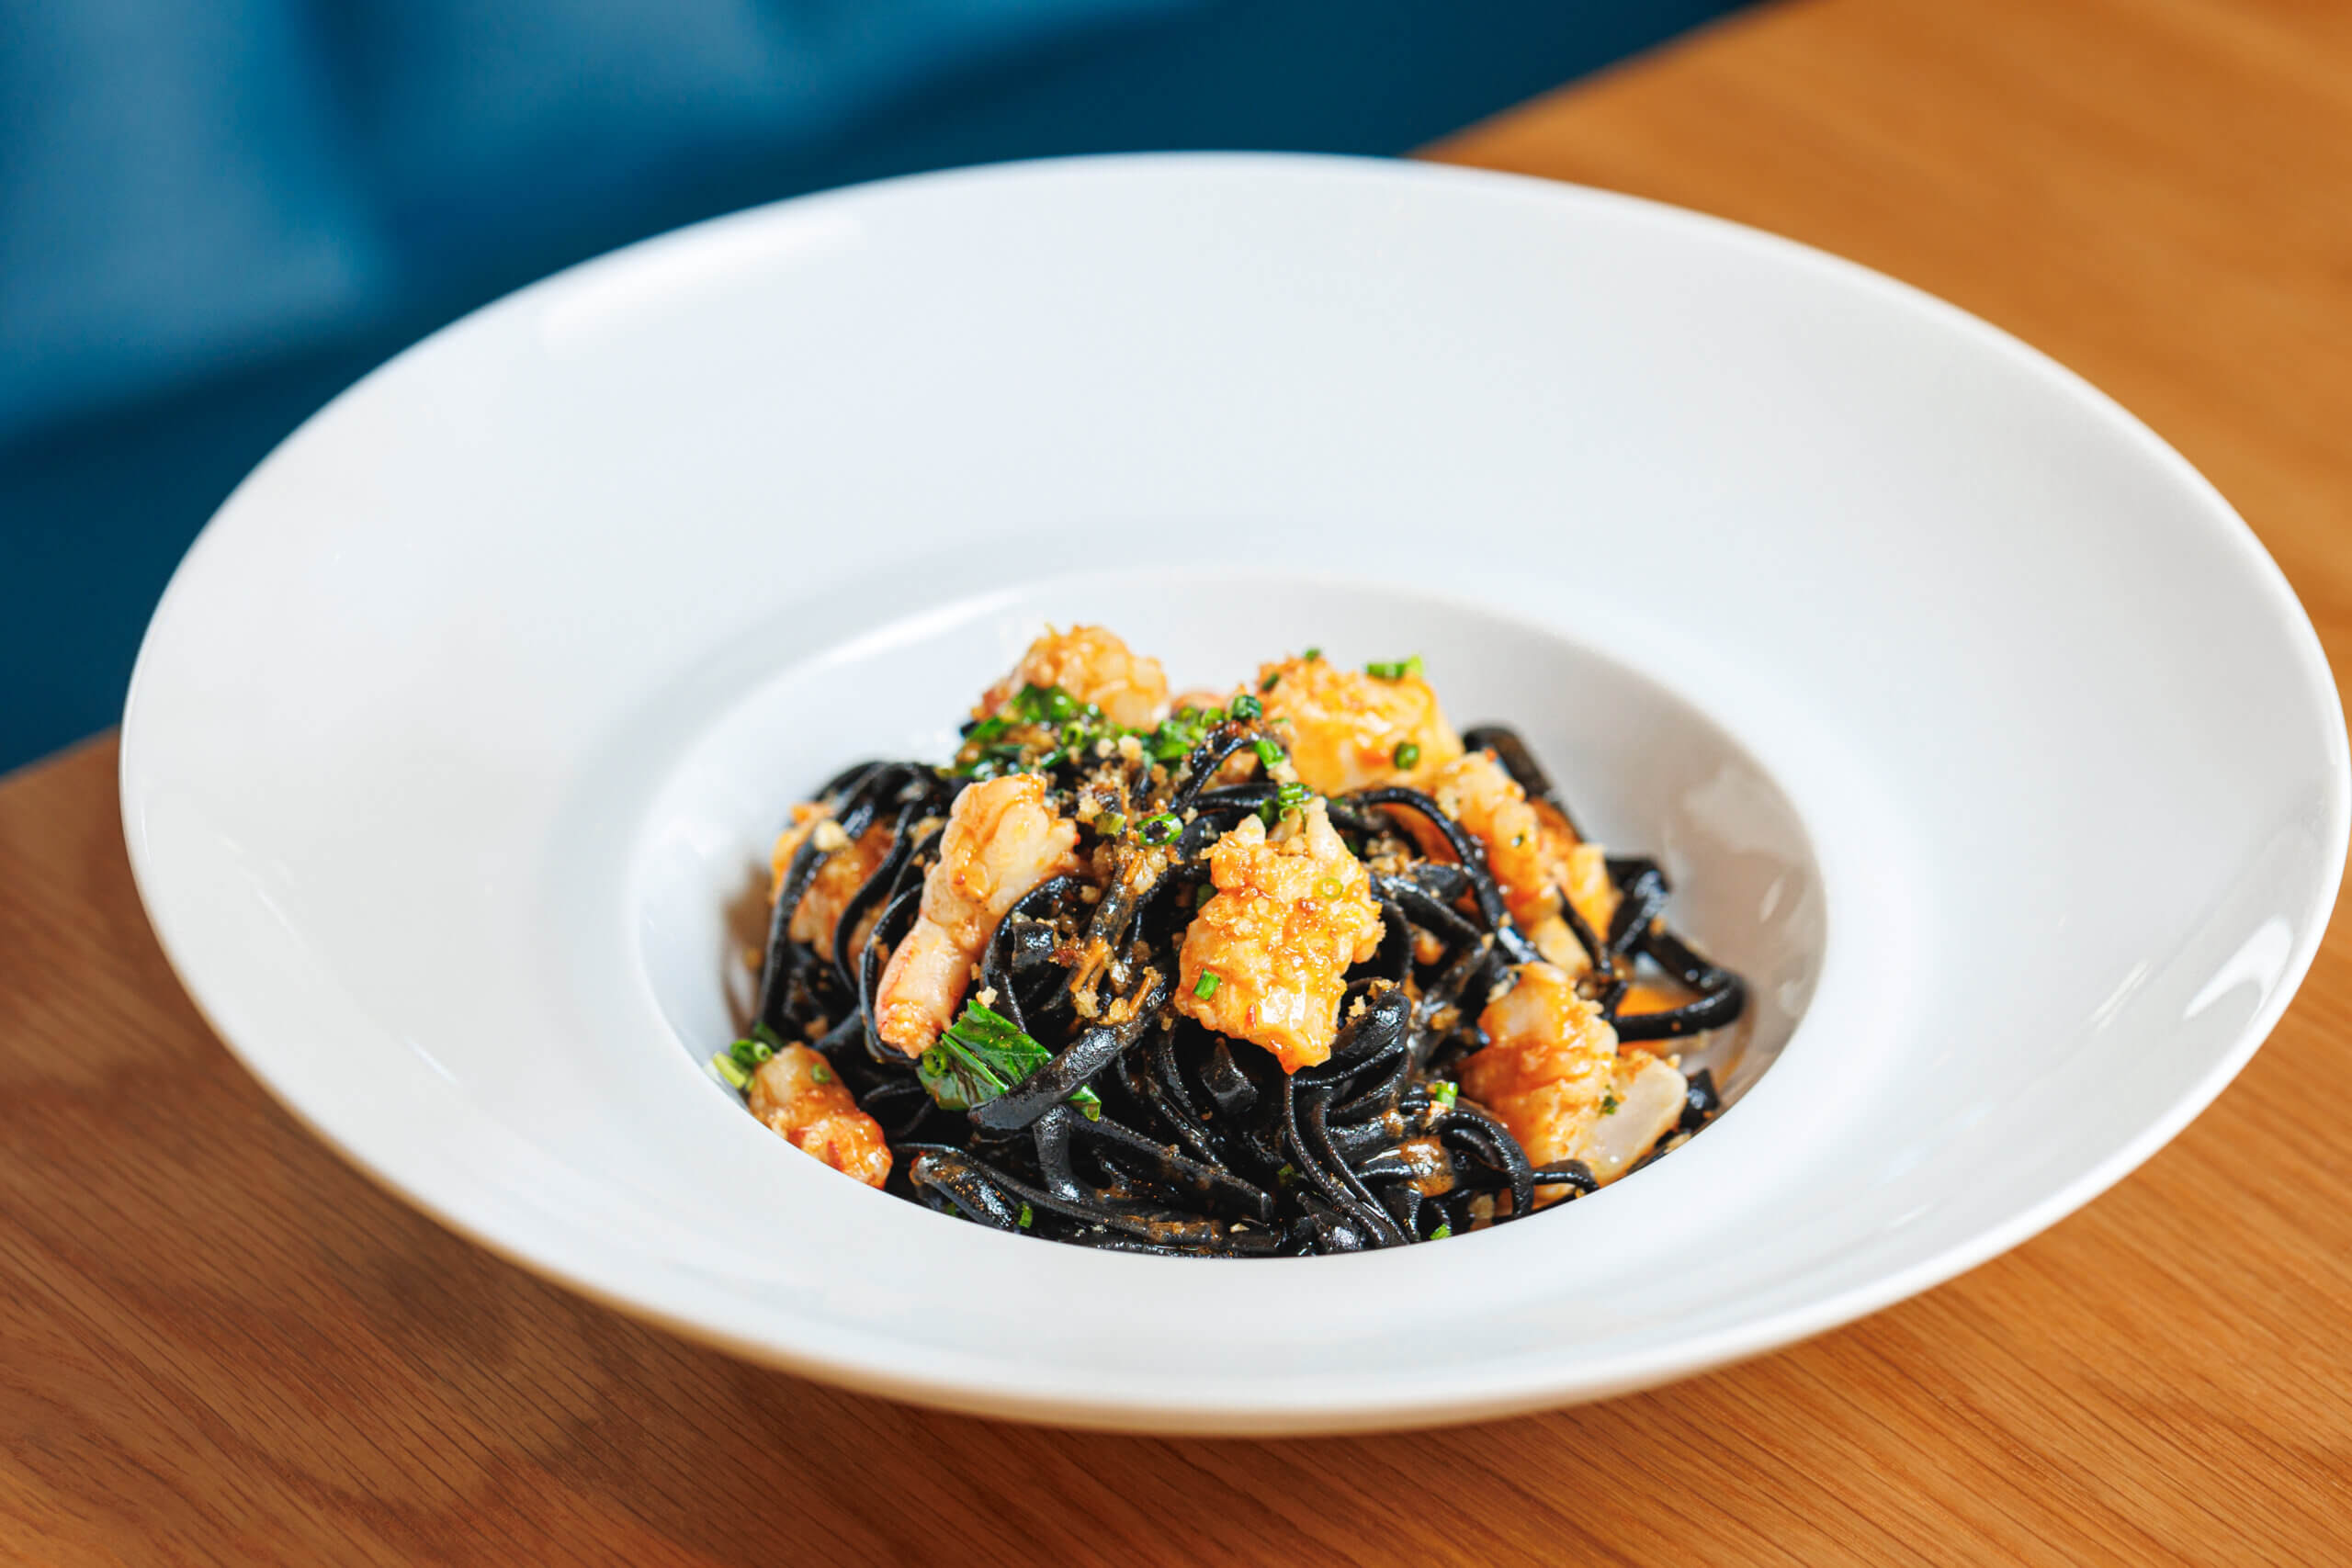 Squid ink linguine with mixed seafood, Calabrian chili paste, and bread crumbs